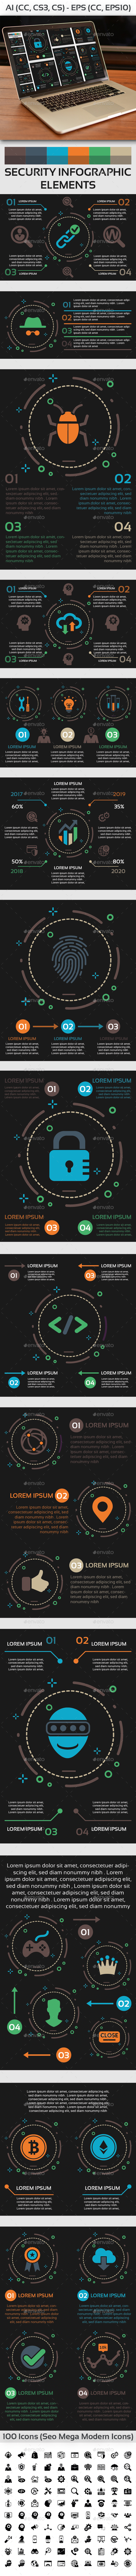 GraphicRiver Security Infographic Elements 20777540